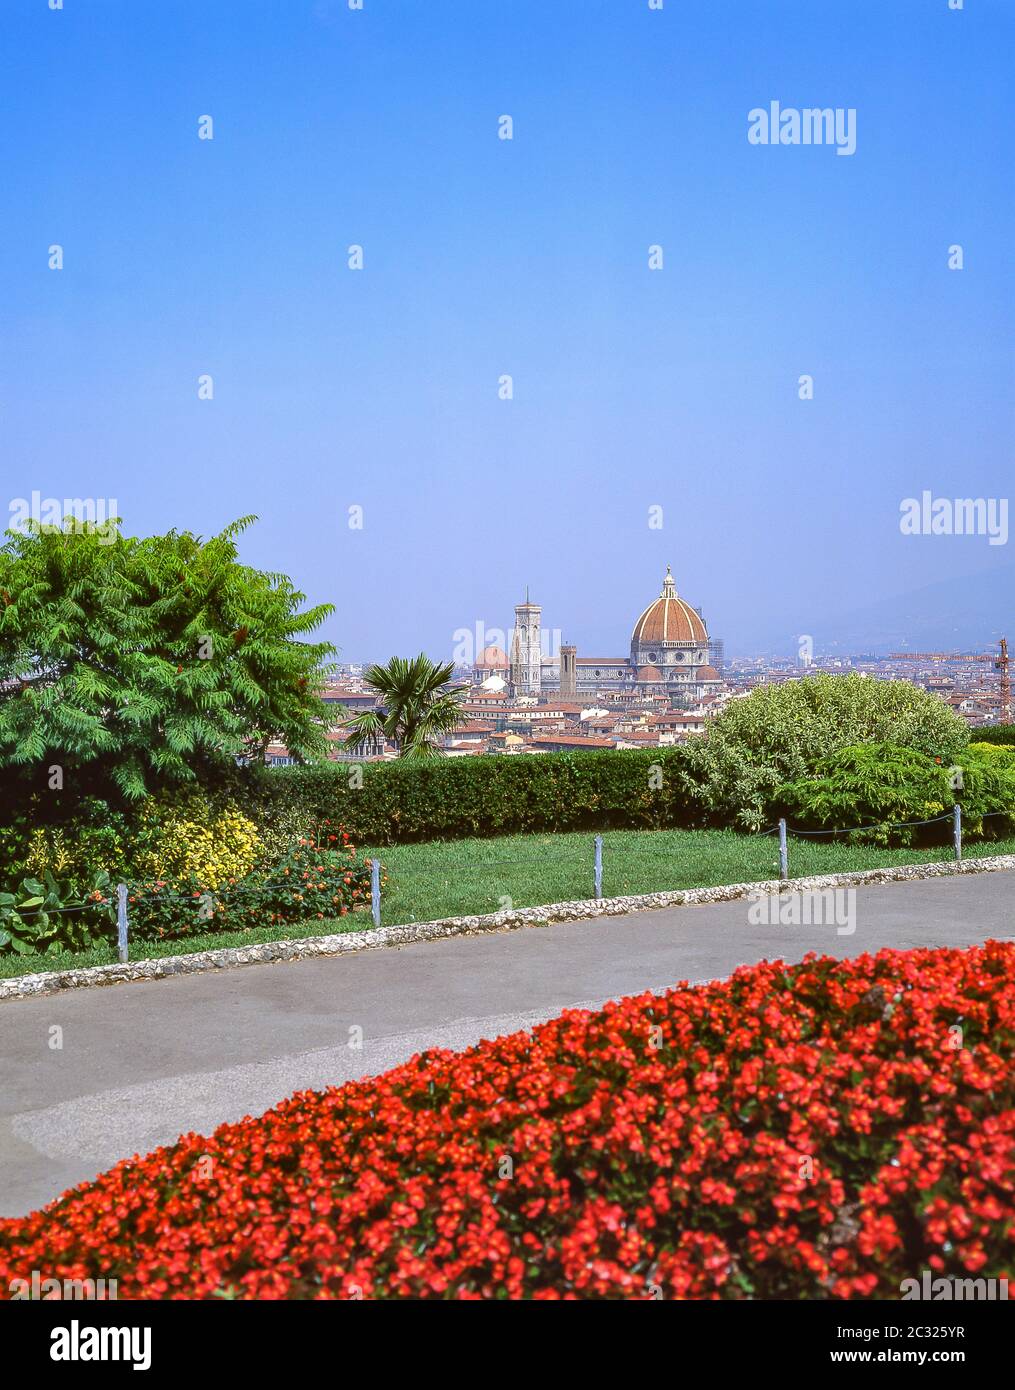 View of Old Town from Piazzale Michelangelo, Florence (Firenze), Tuscany Region, Italy Stock Photo